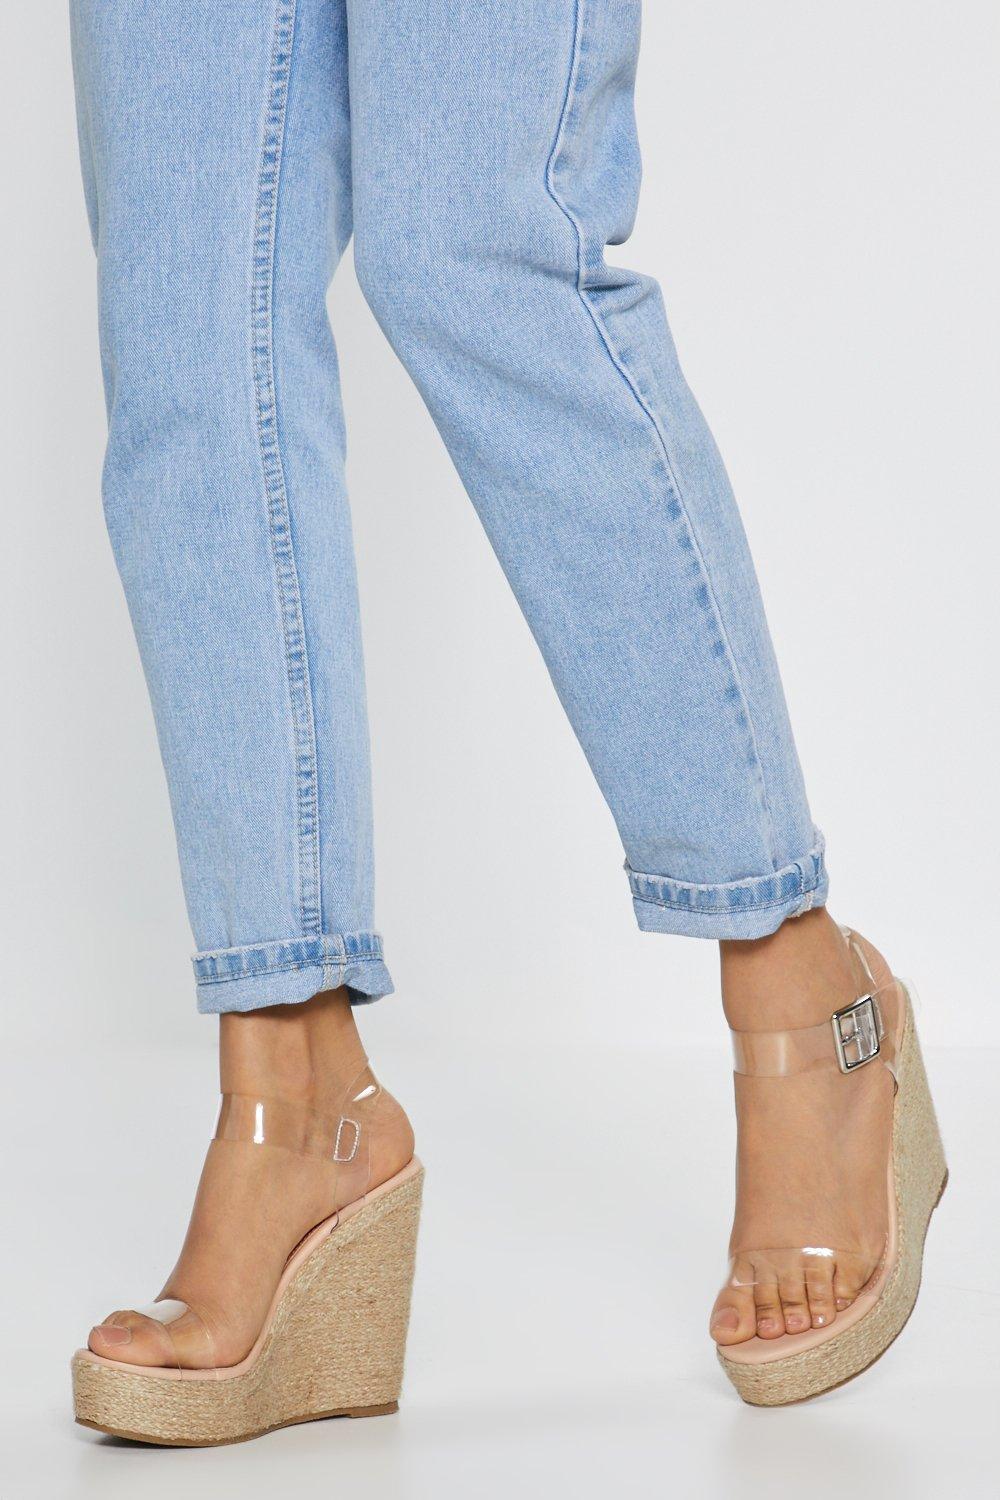 clear slip on wedges